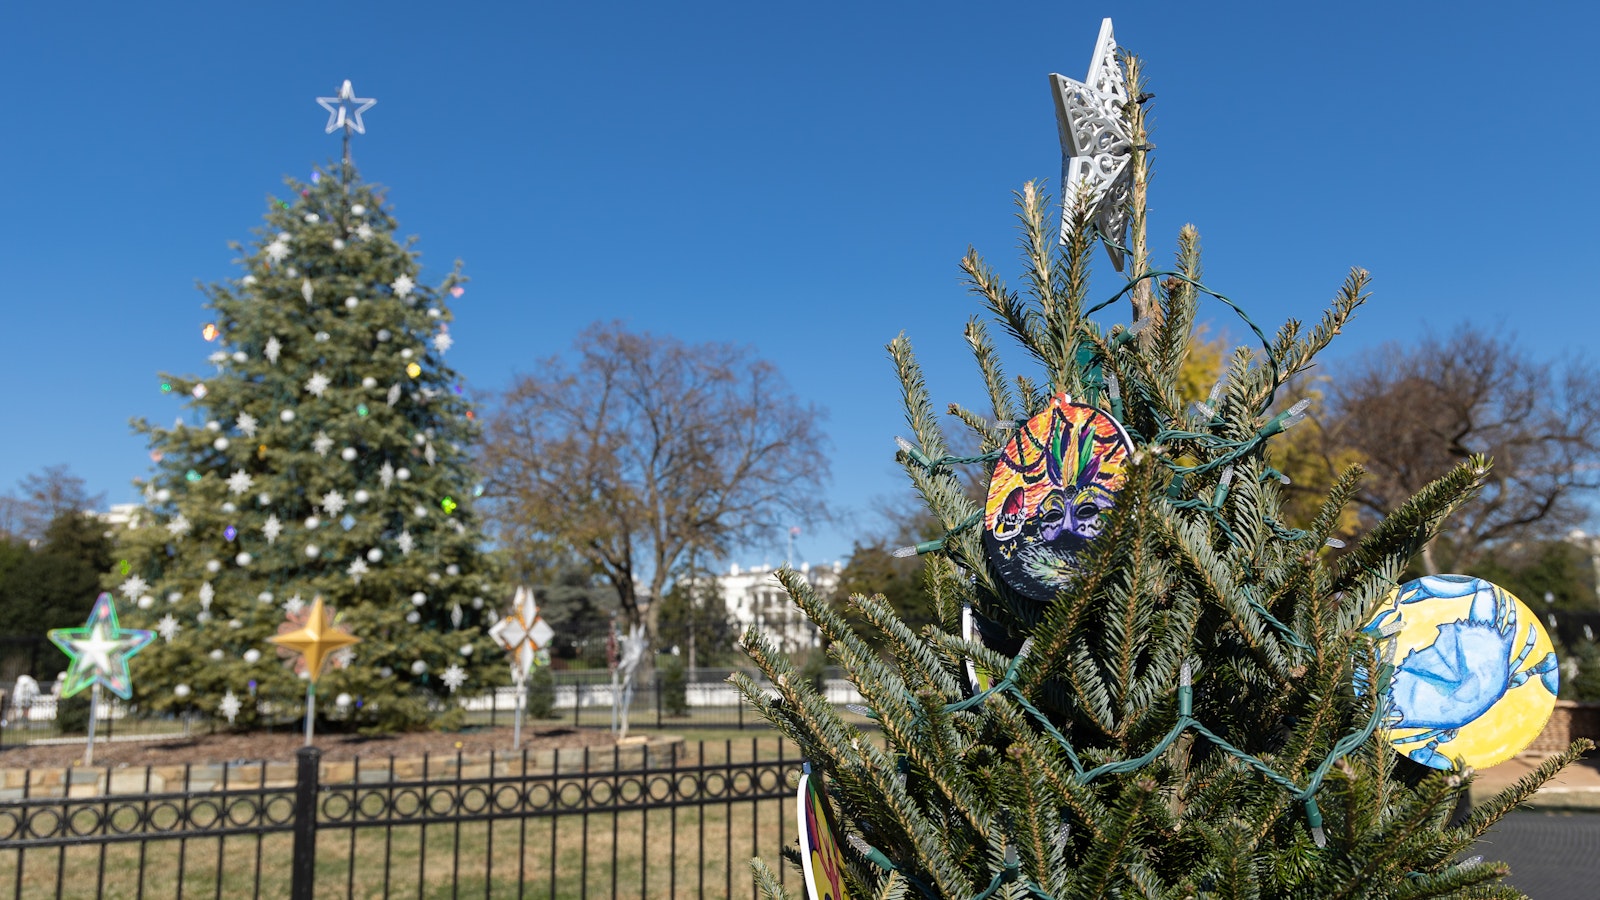 Volunteers decorate the Louisiana Christmas tree in front of the White House for the 2022 National Christmas Tree Lighting.